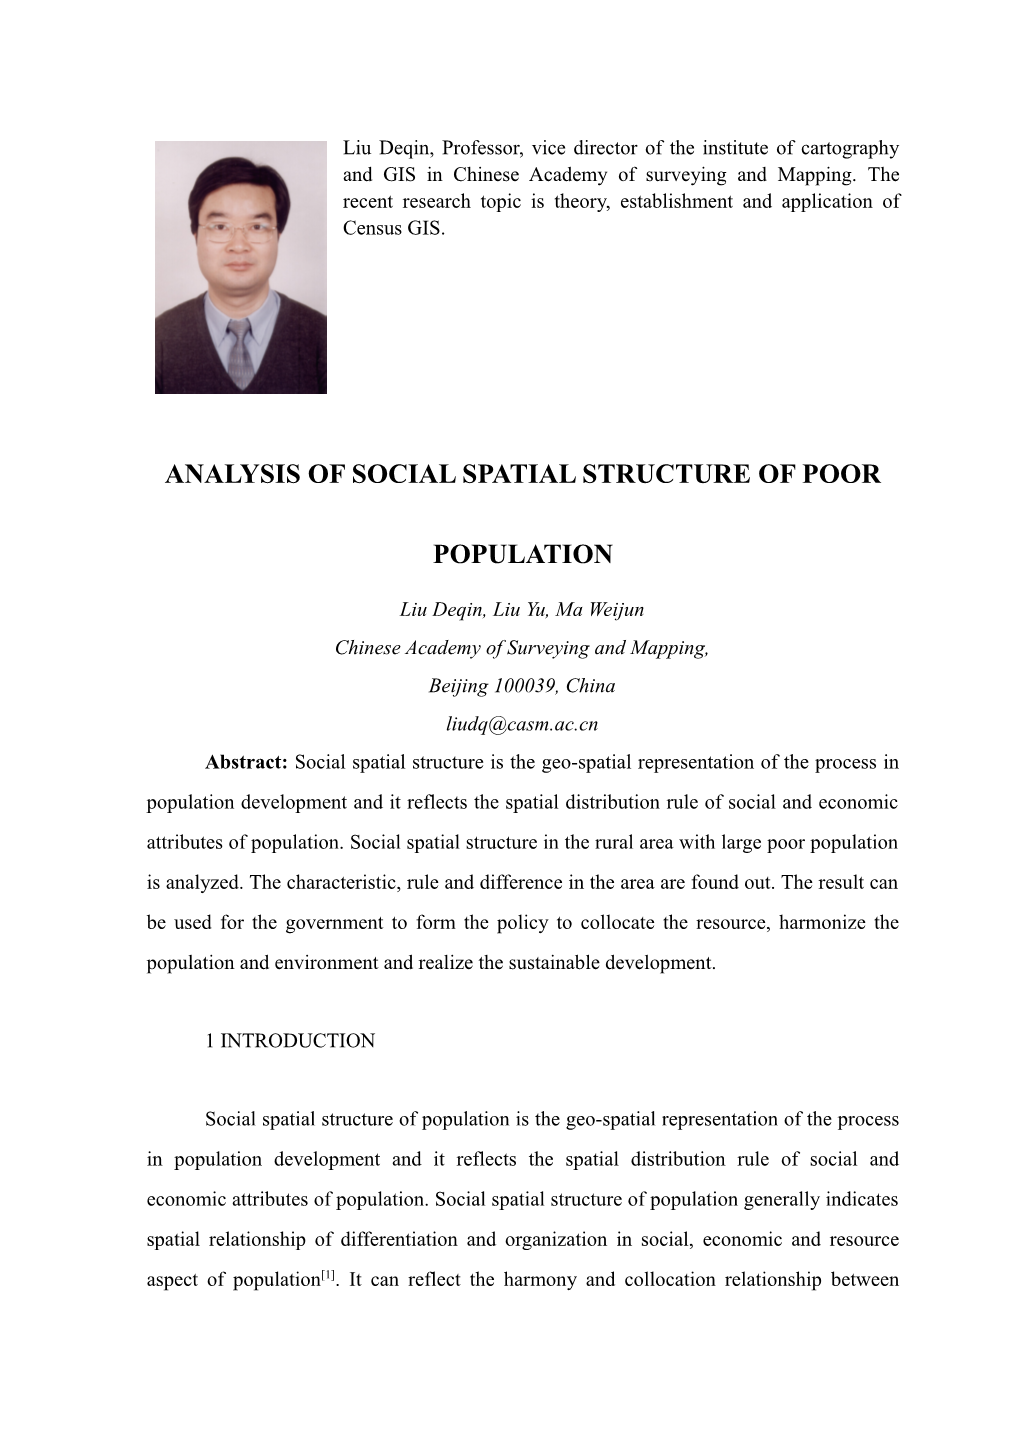 Analysis of Social Spatial Structure of Poor Population